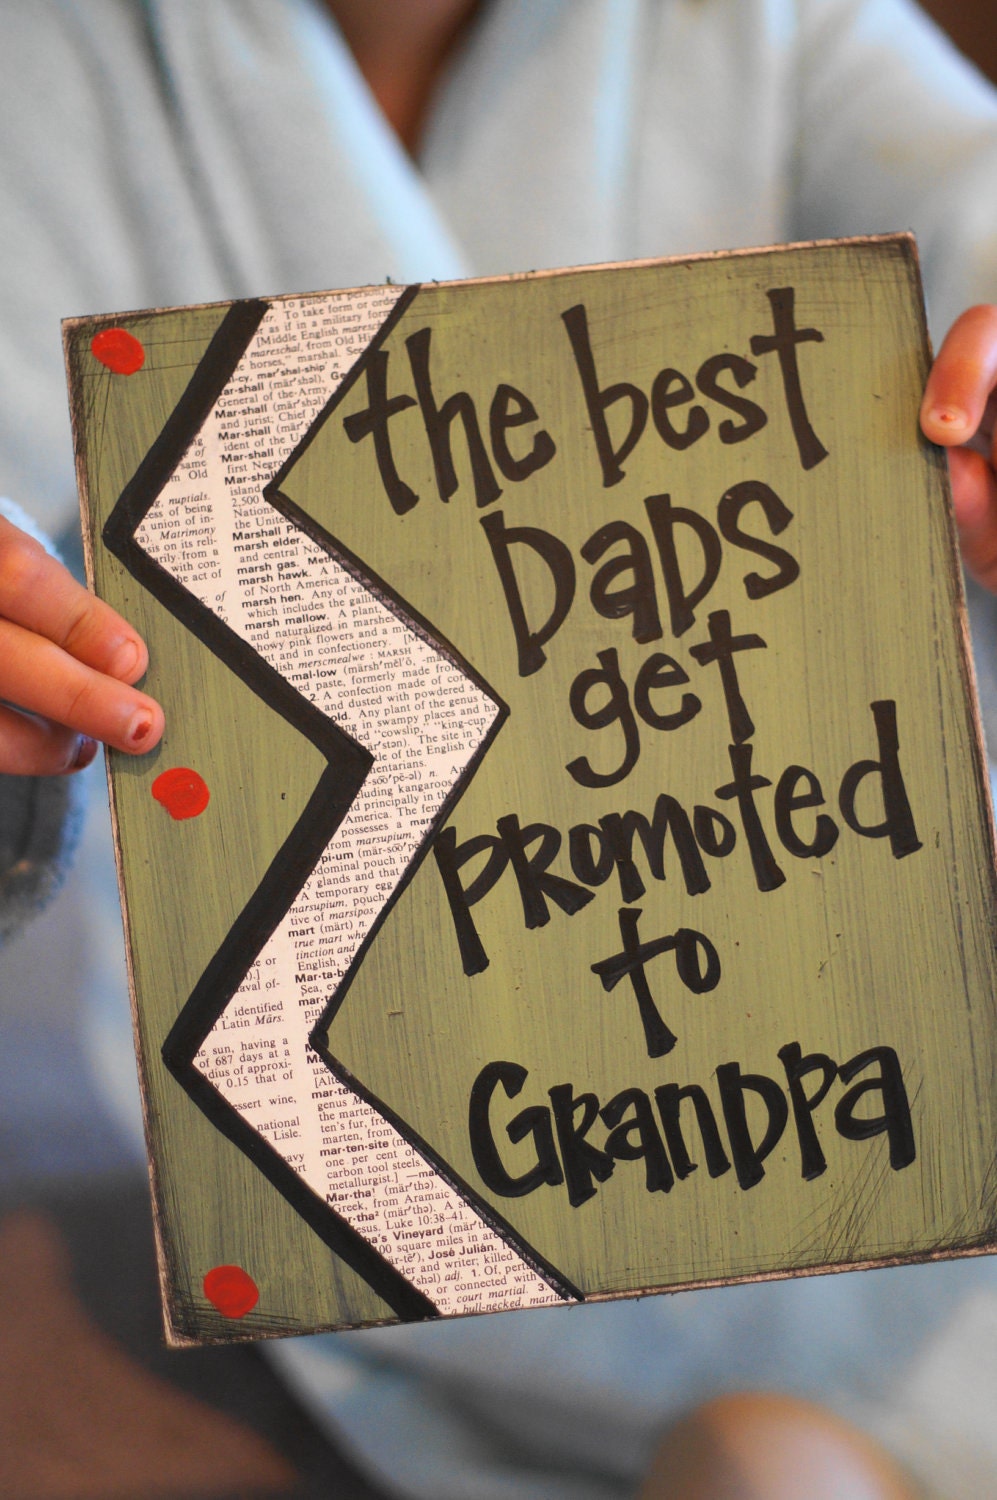 Download Best dad's get promoted to grandpa card